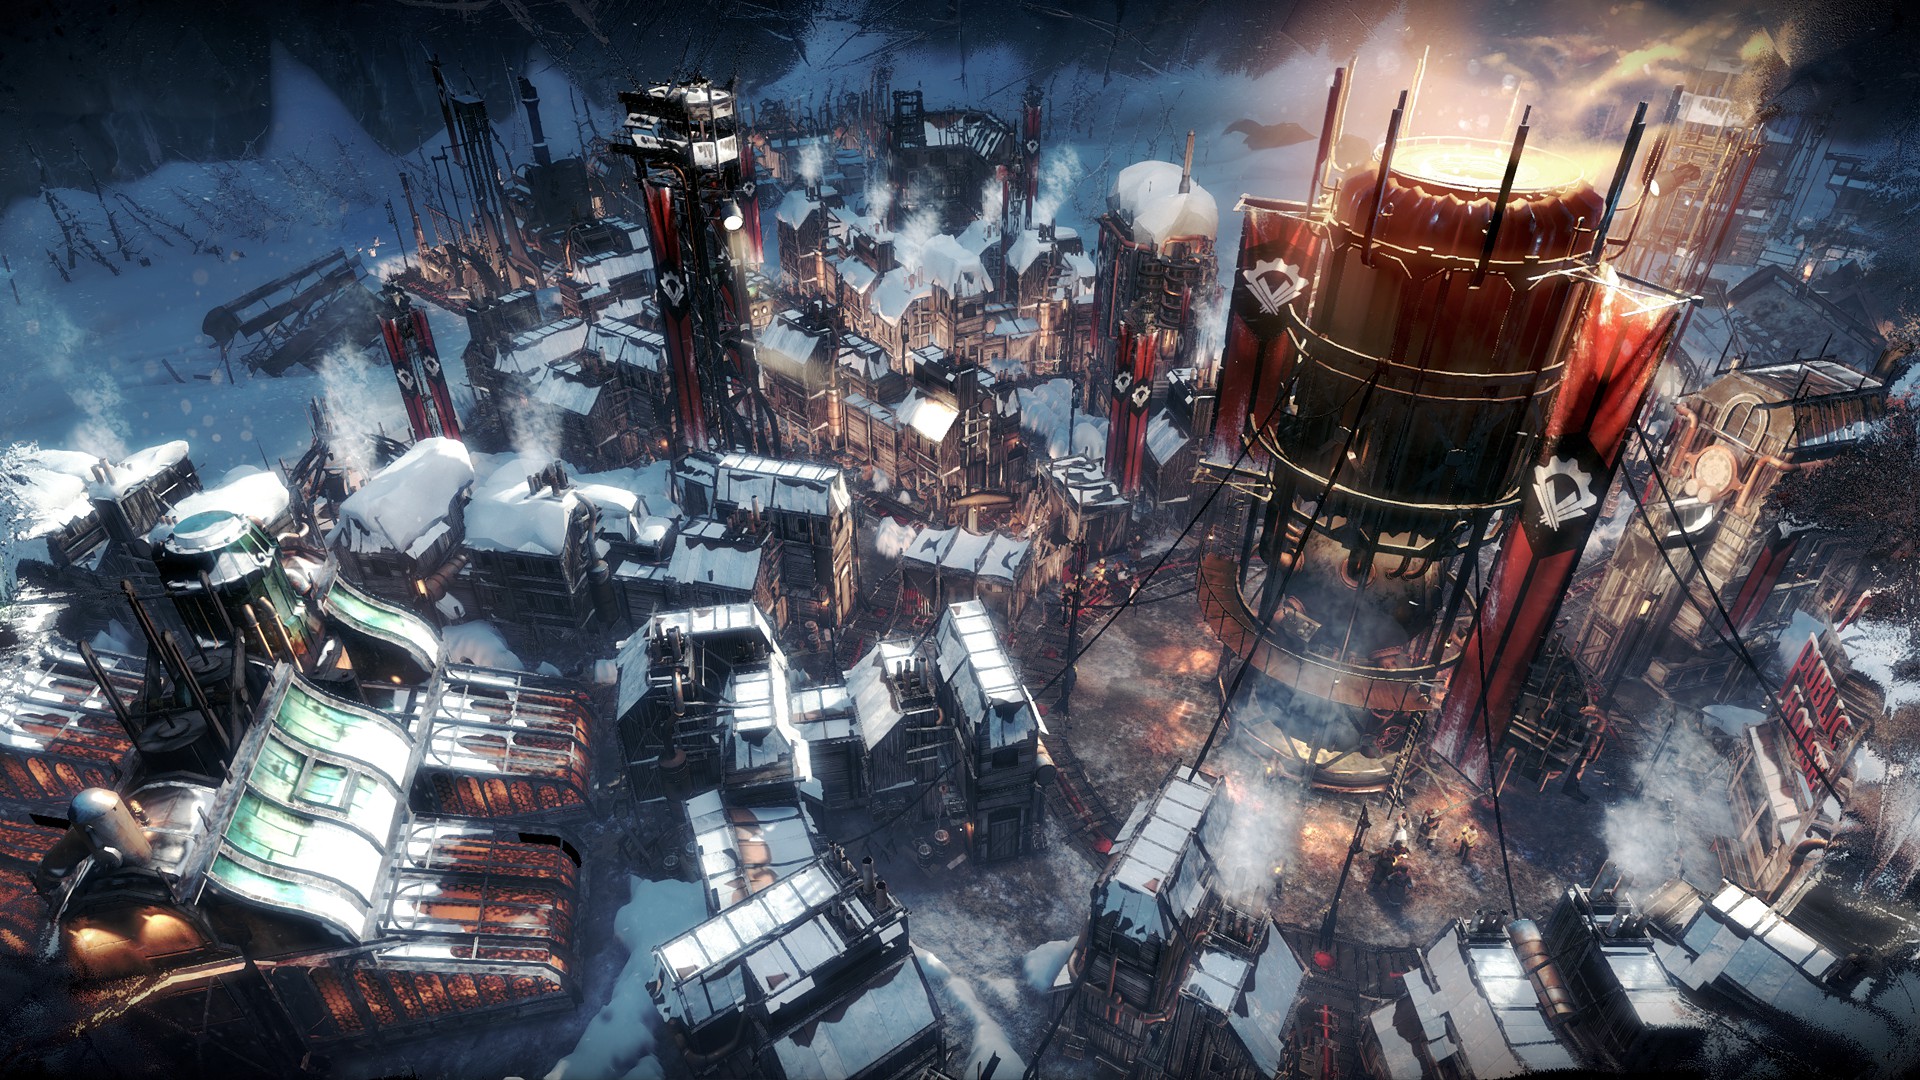 spiller tandpine vase Frostpunk's Endless Mode Update is Out Now, Contains 3 New Maps